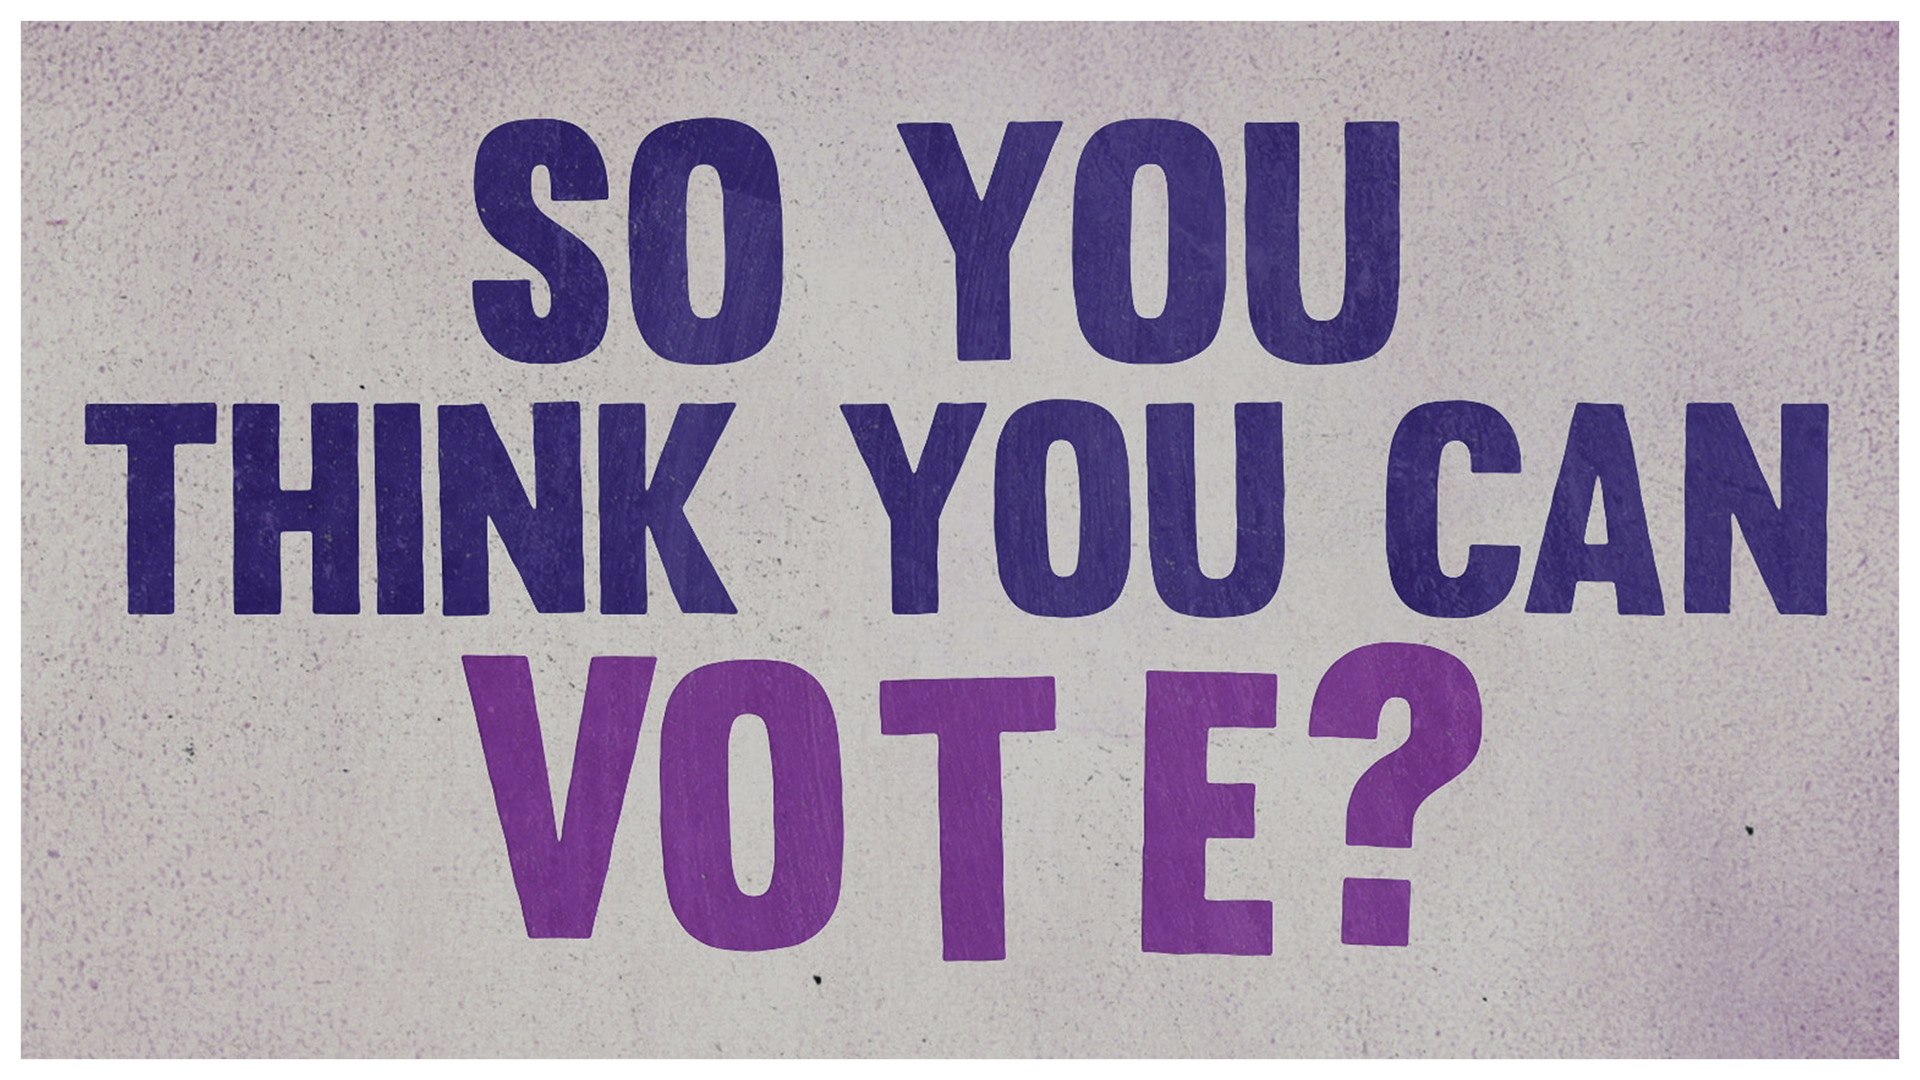 So You Think You Can Vote?